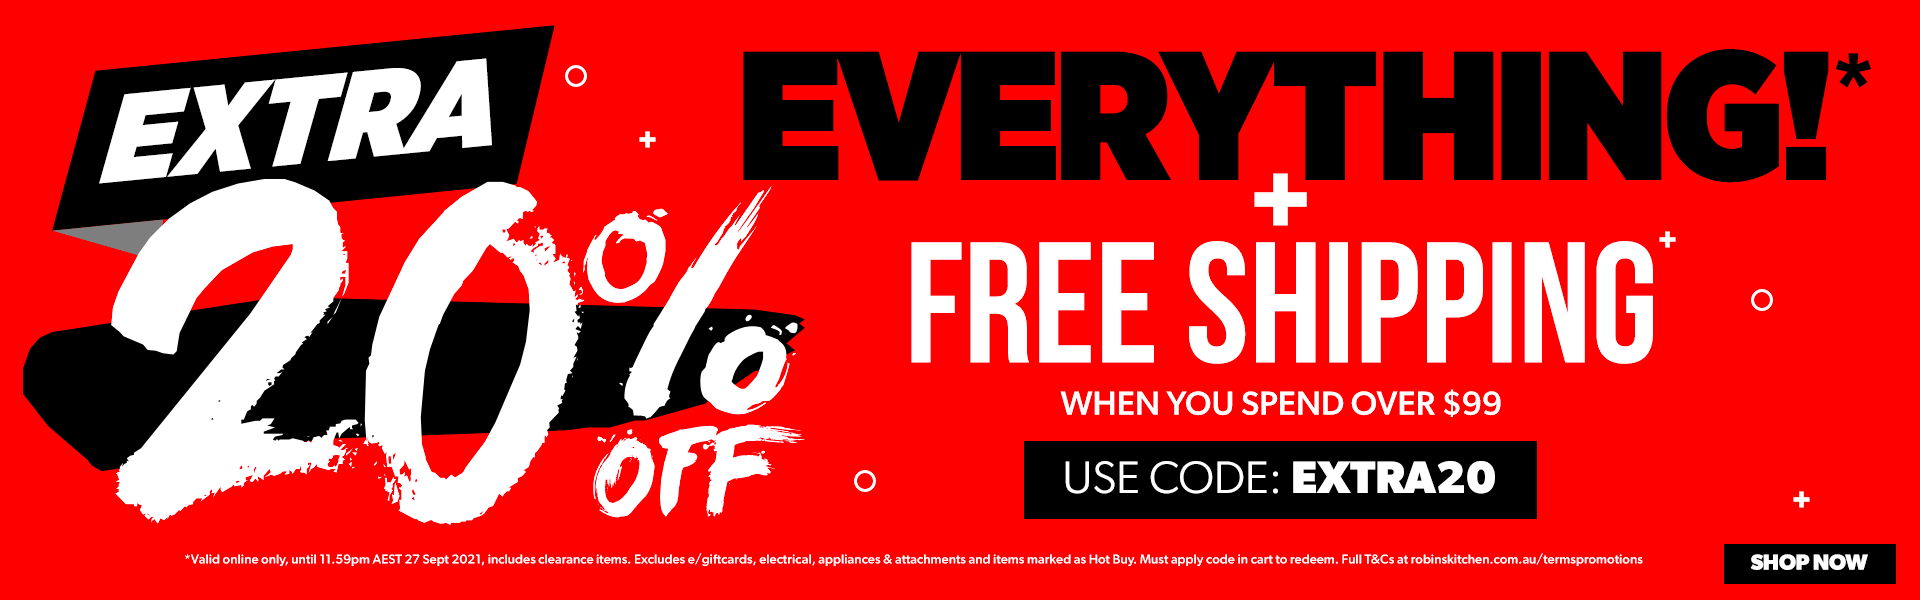 Extra 20% OFF on everything + free shipping